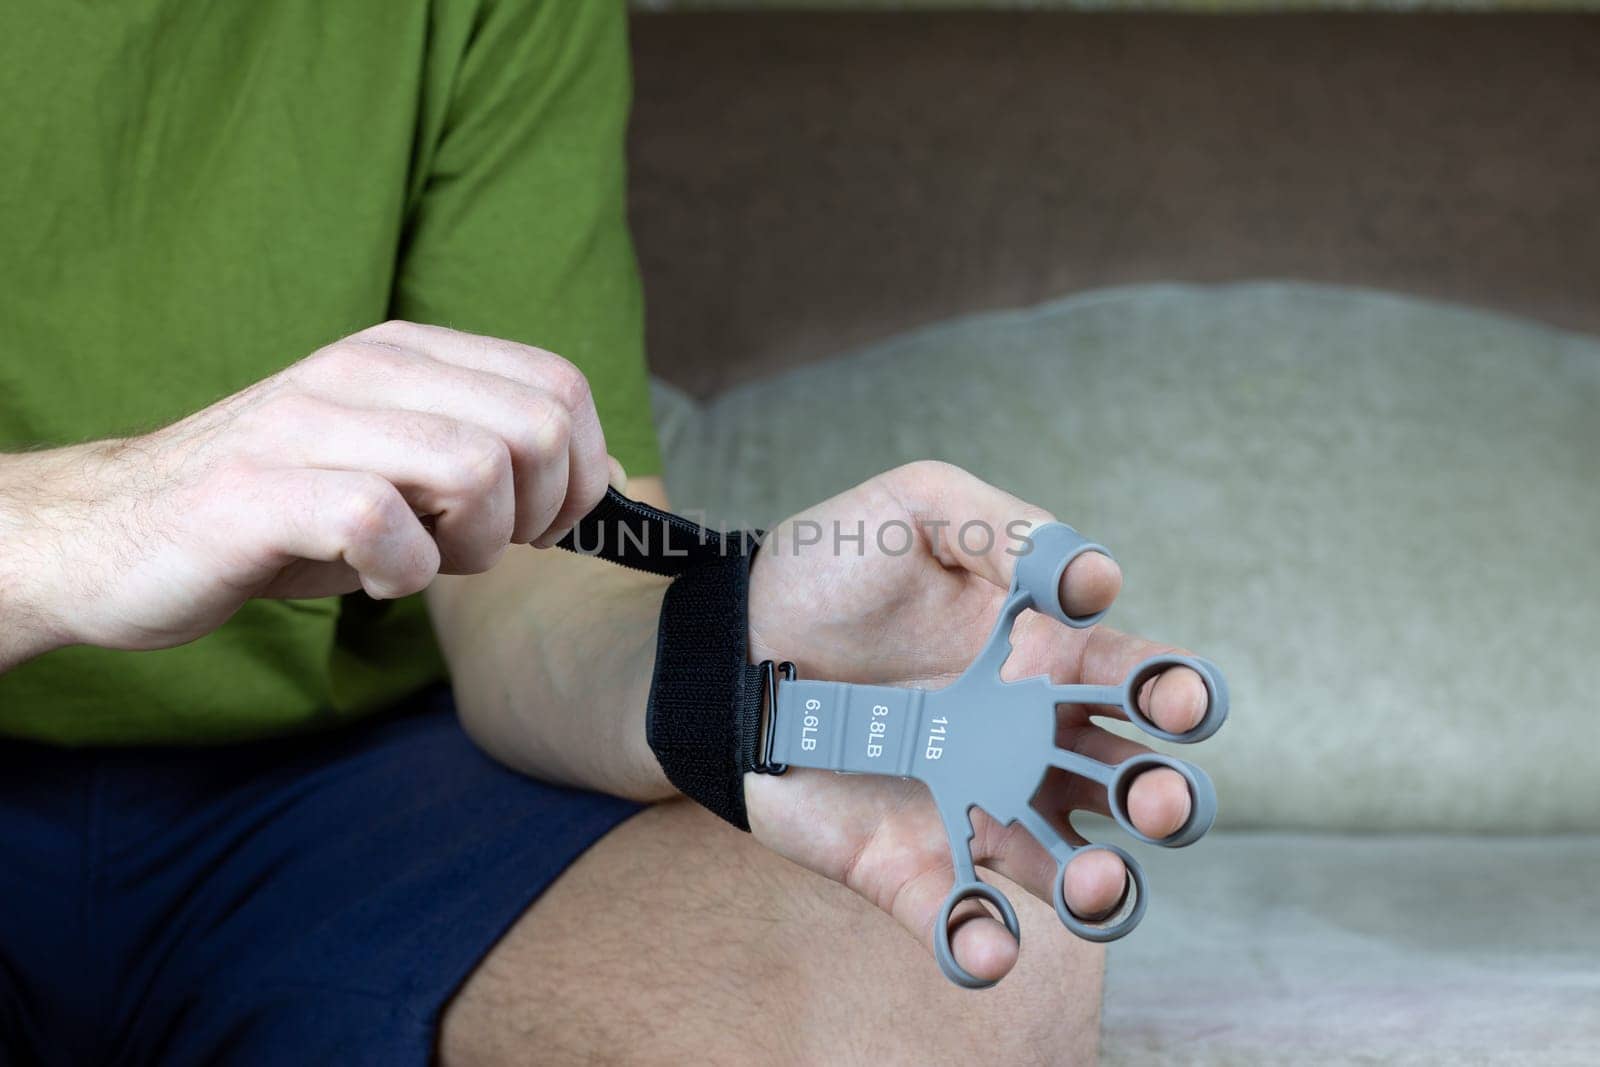 Hands are put on silicone finger trainer with special velcro fastening to extend the fingers and strengthen the hands